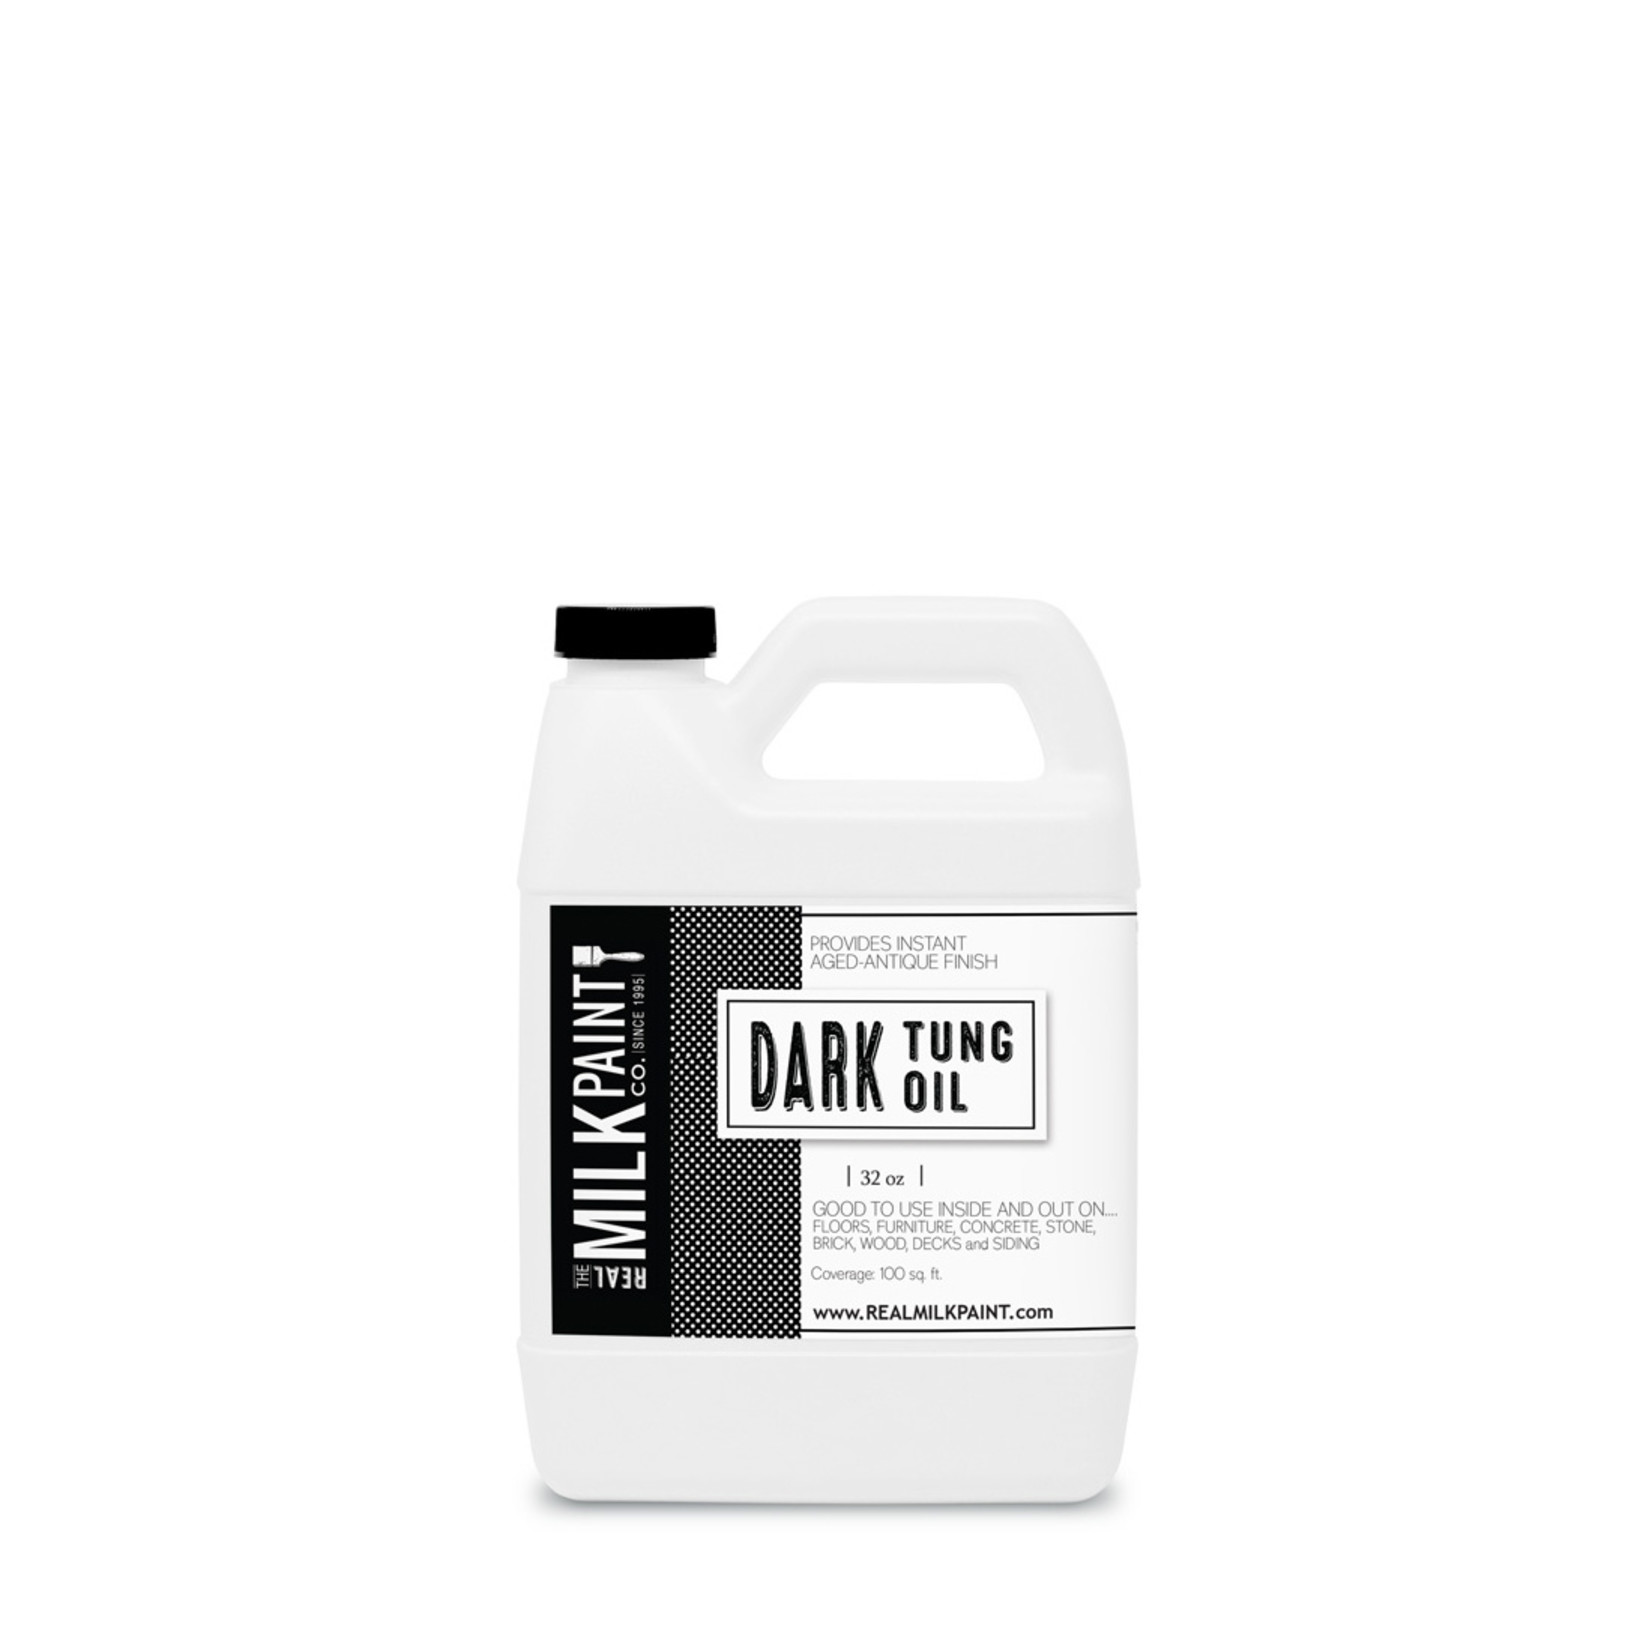 The Real Milk Paint Co. Real Milk Paint Dark Tung Oil